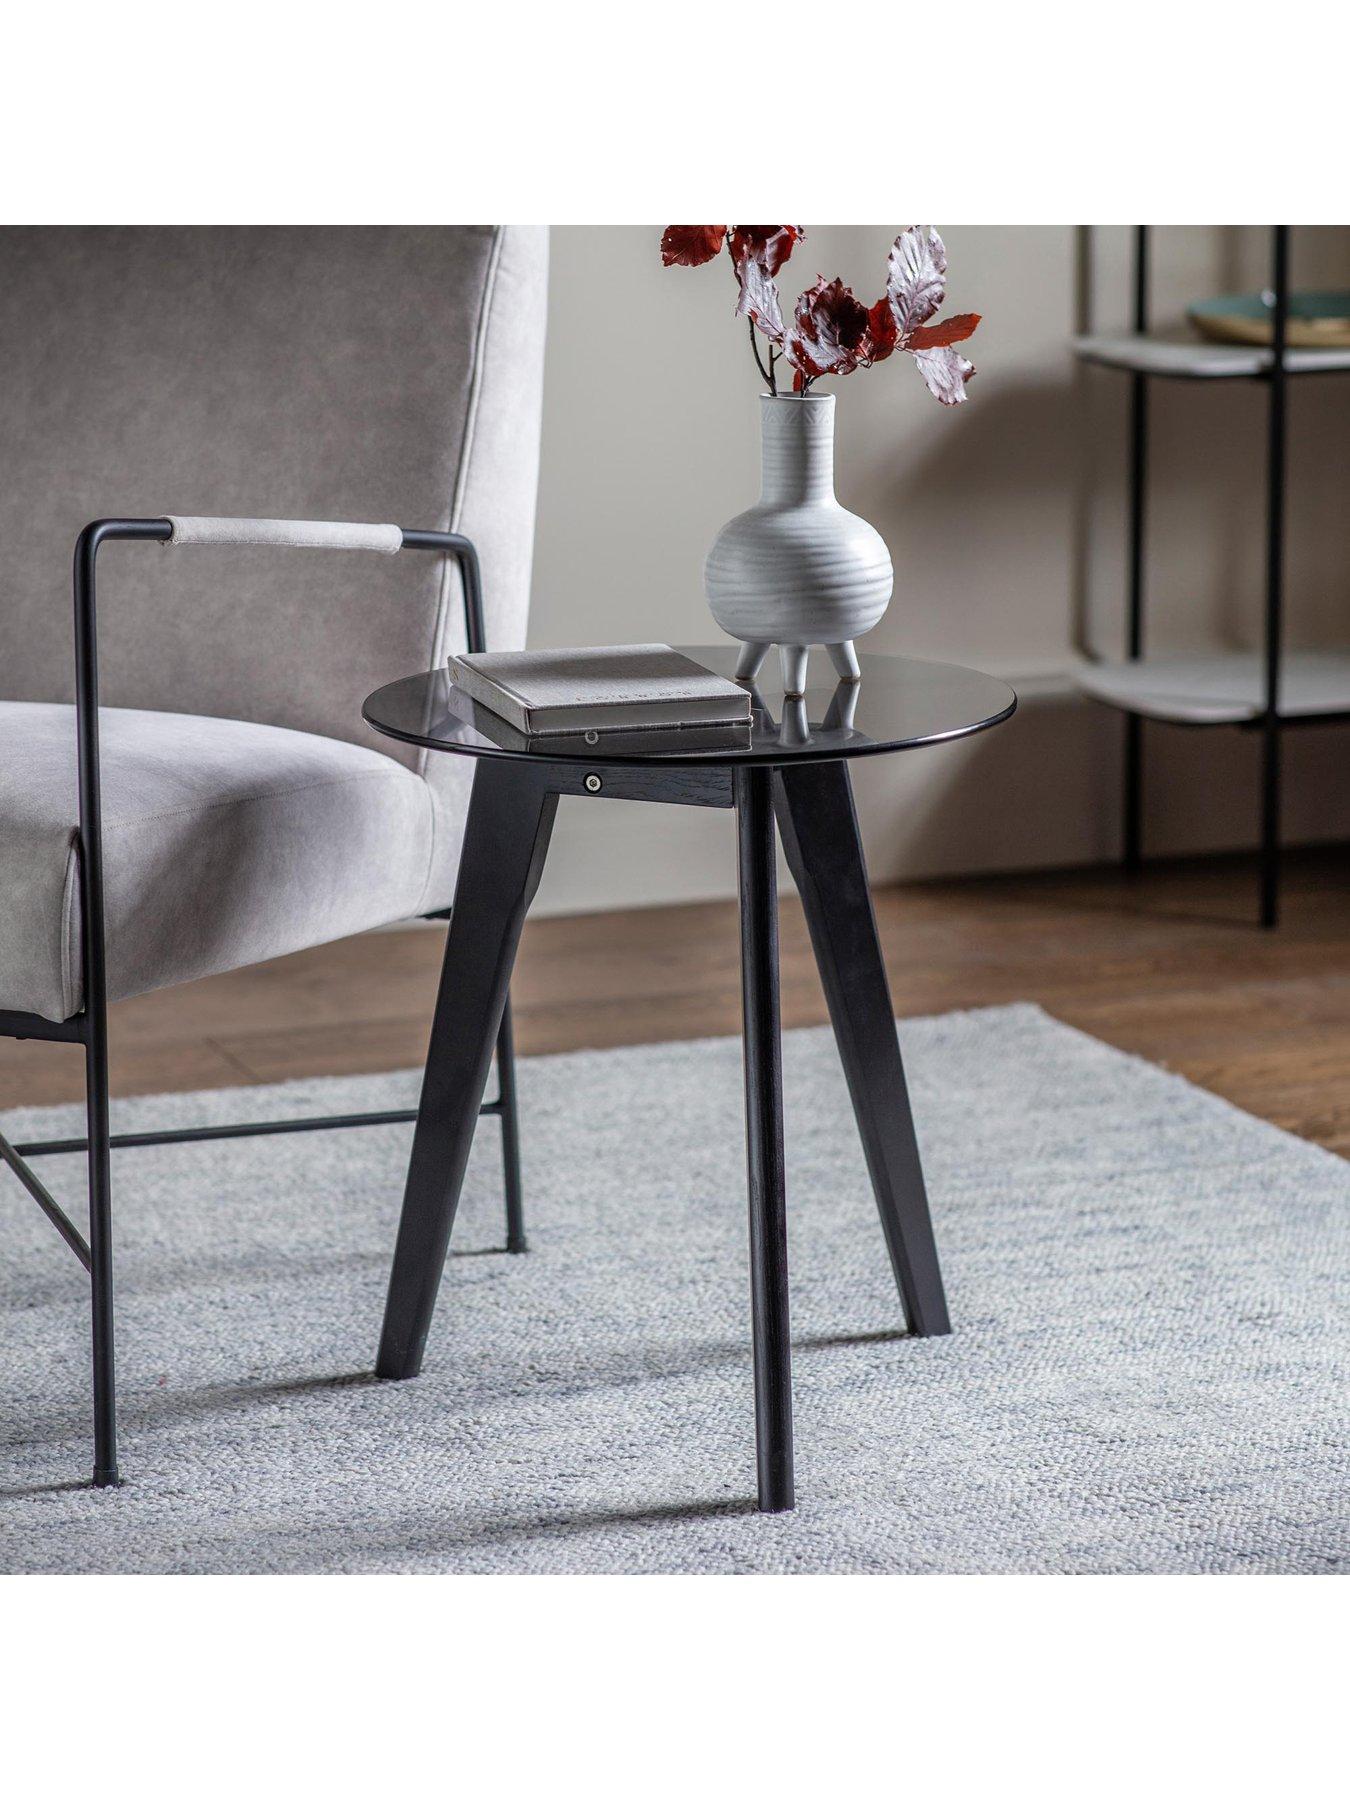 Gallery Simard Round Side Table Black